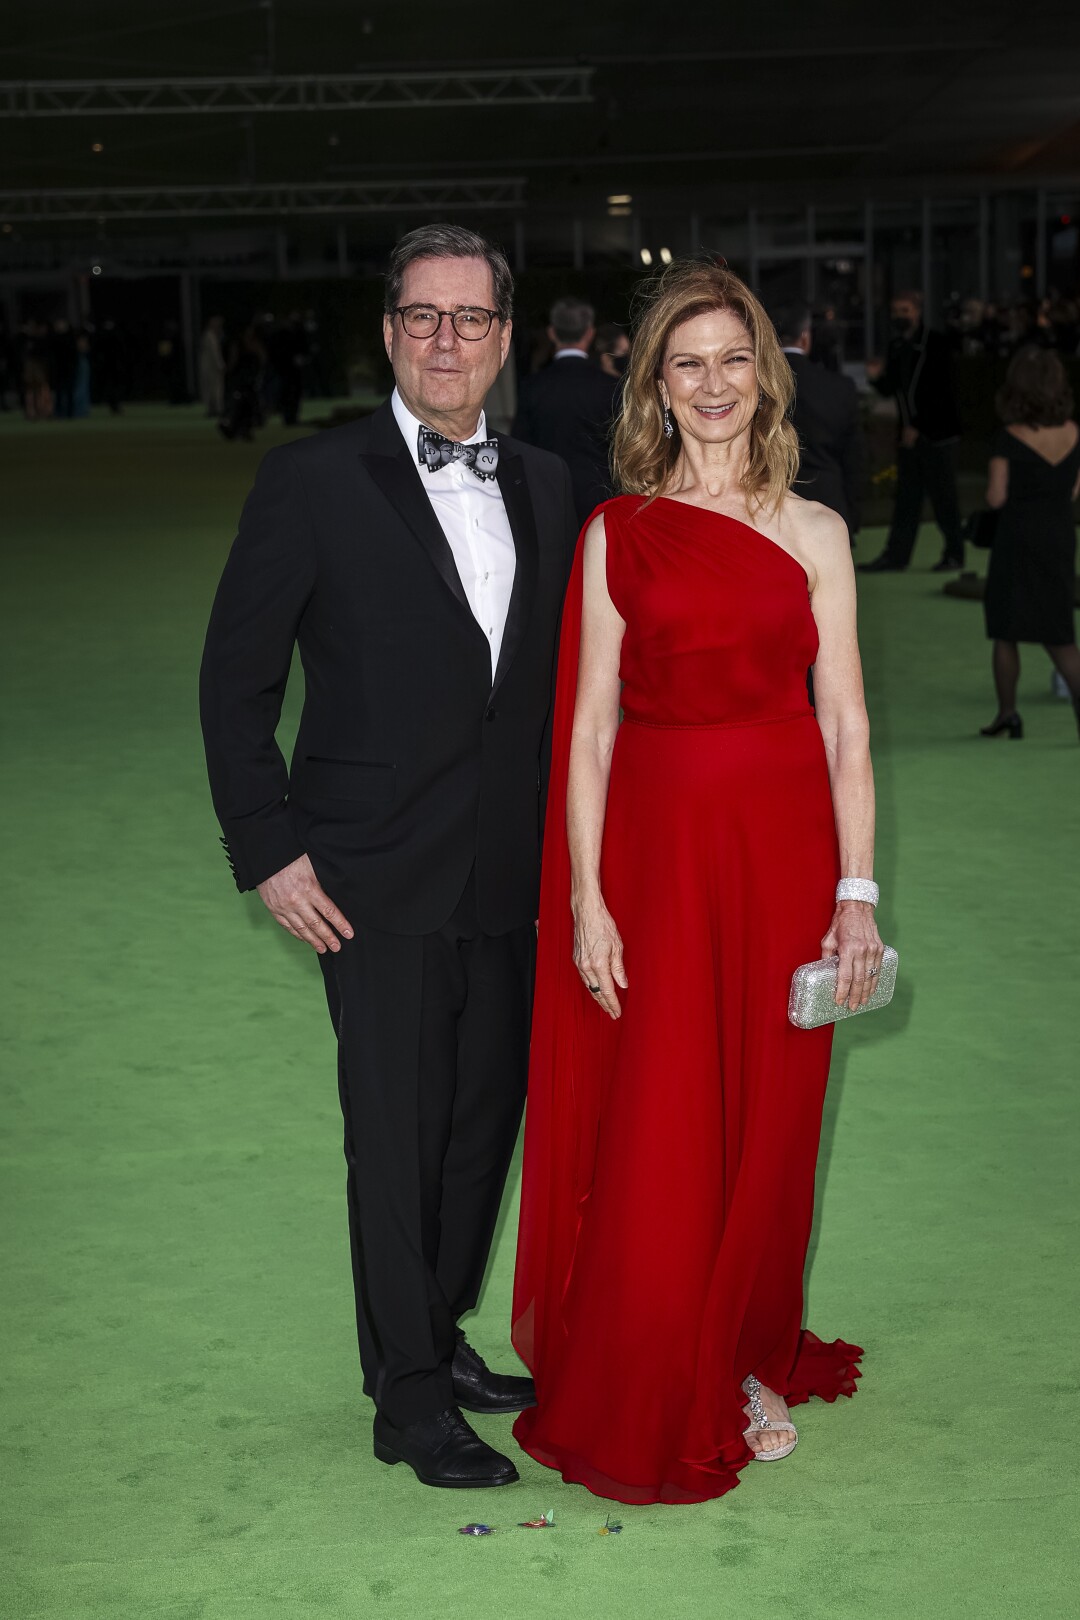 A man in a black suit and a woman in a red dress posing on a green carpet